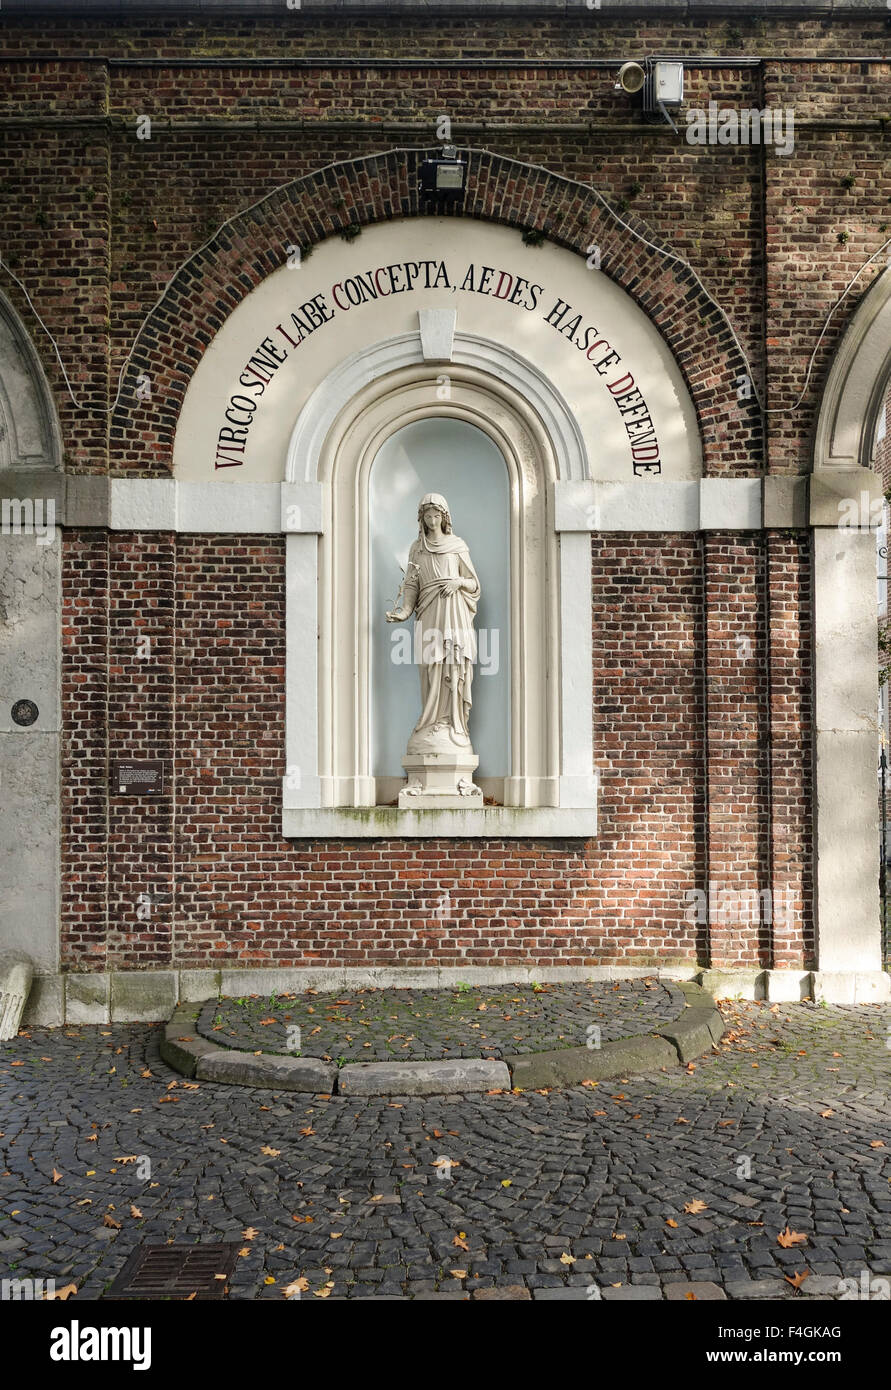 Entrance with statue of virgen Mary of Rolduc medieval abbey, Kerkrade, Limburg, Netherlands Stock Photo